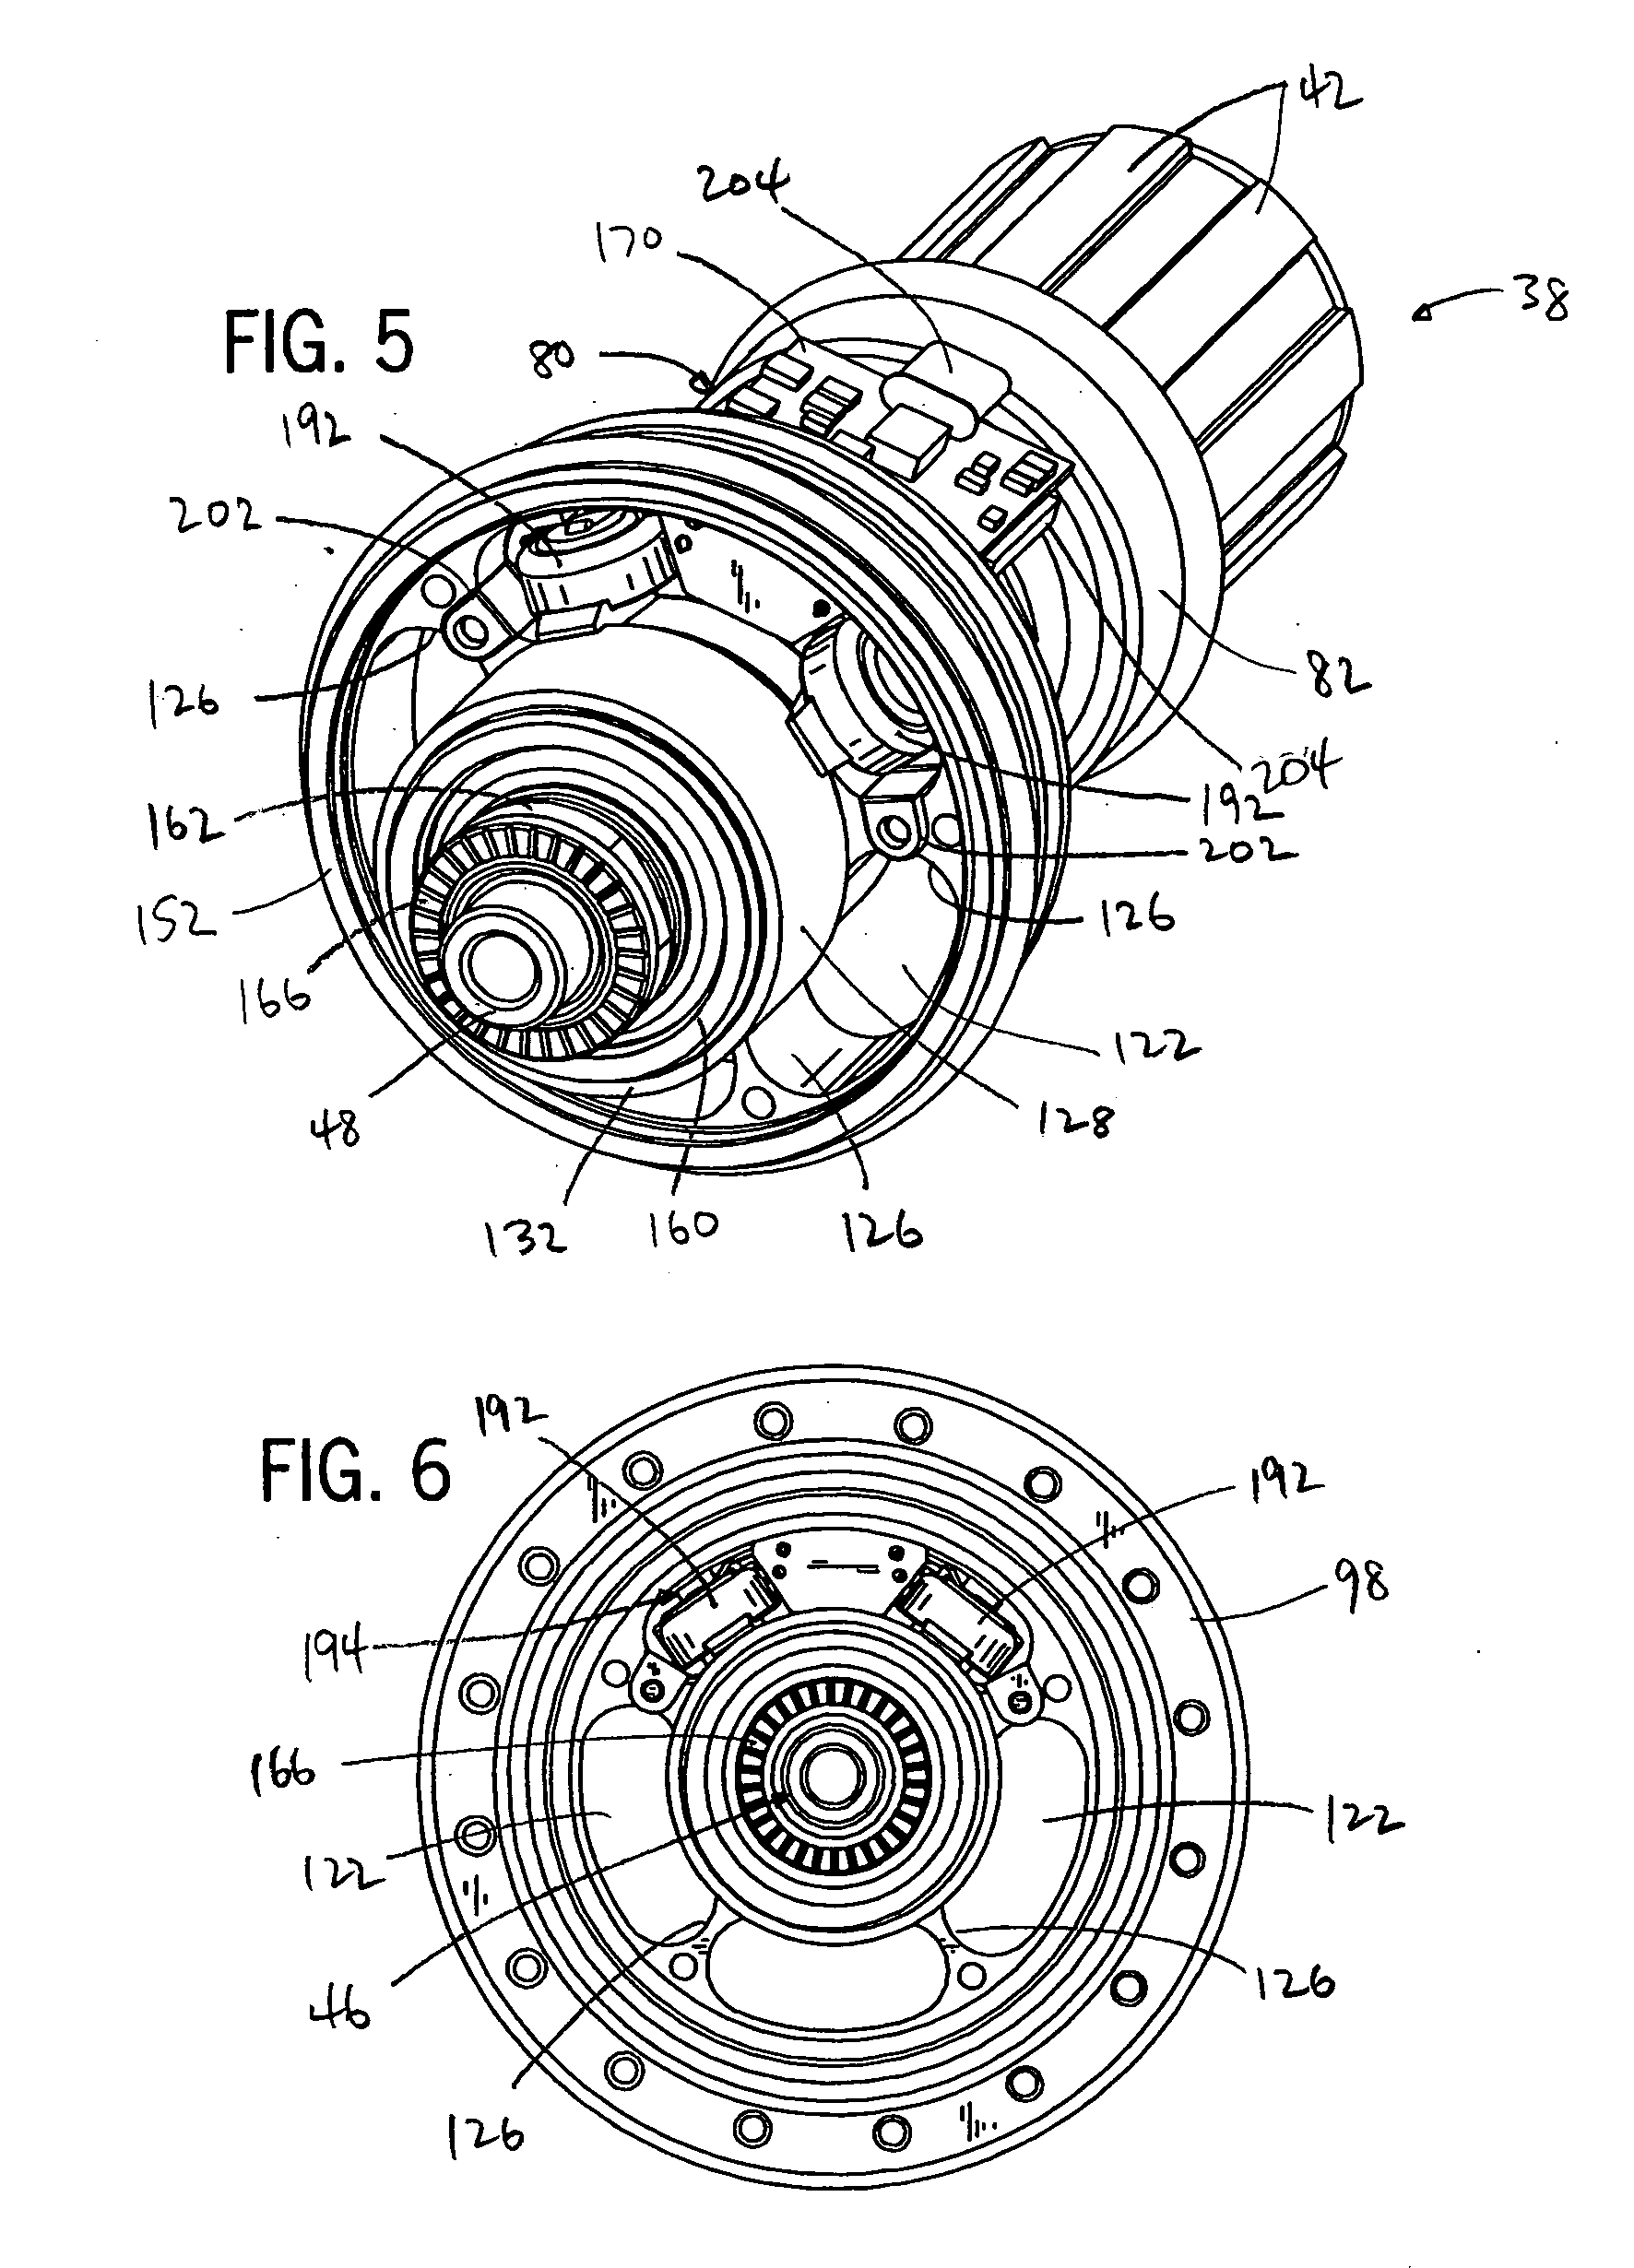 Enclosed operating characteristic sensor for a bicycle component including an emitter for emitting an operating characteristic signal